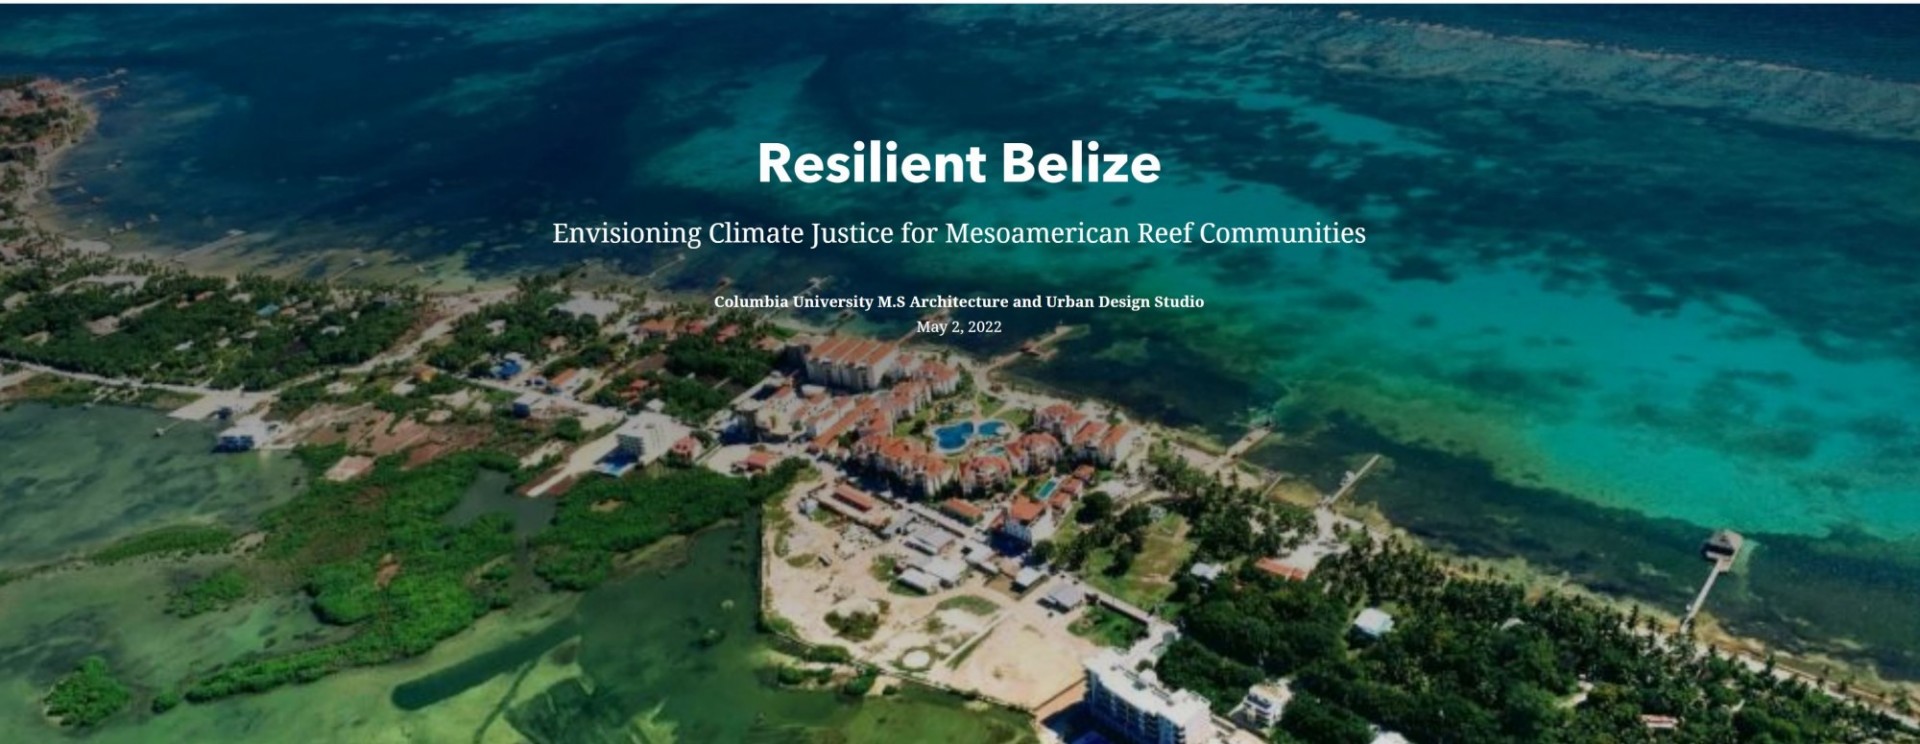 Resilient Belize : Envisioning Climate Justice for Mesoamerican Reef Communities